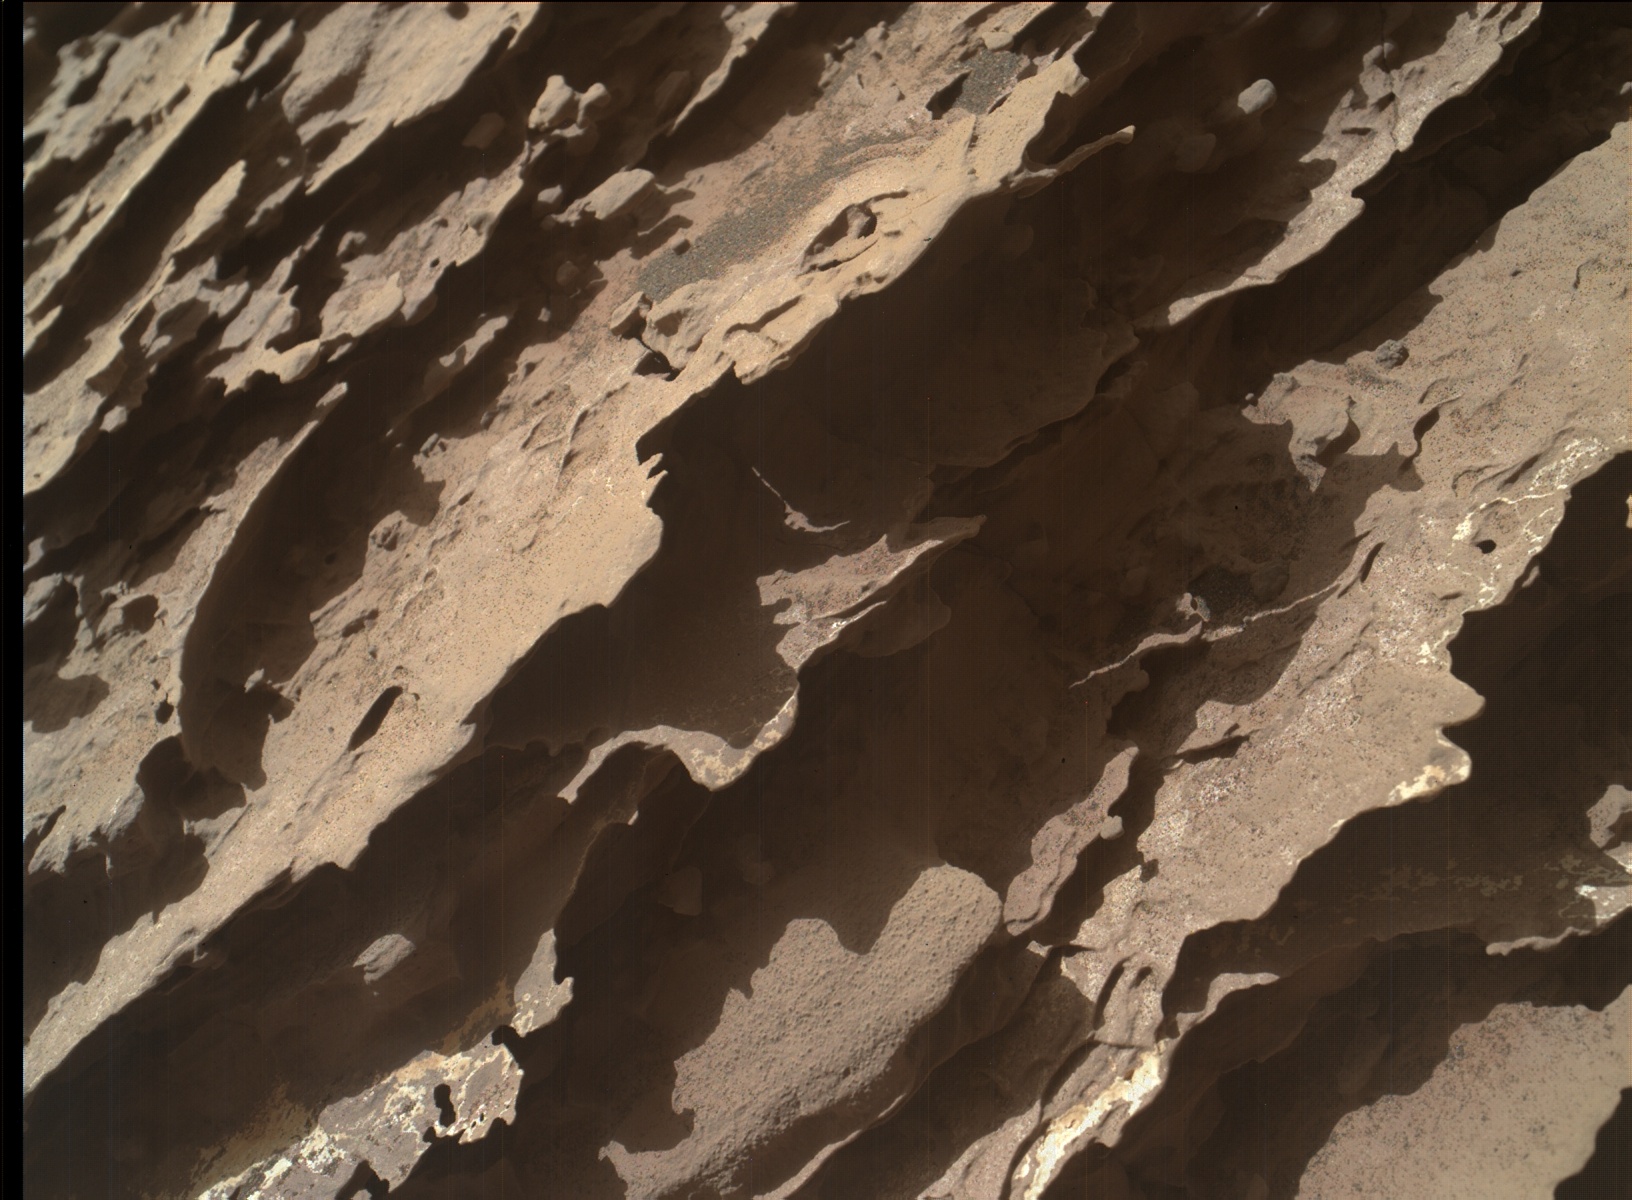 Nasa's Mars rover Curiosity acquired this image using its Mars Hand Lens Imager (MAHLI) on Sol 2049